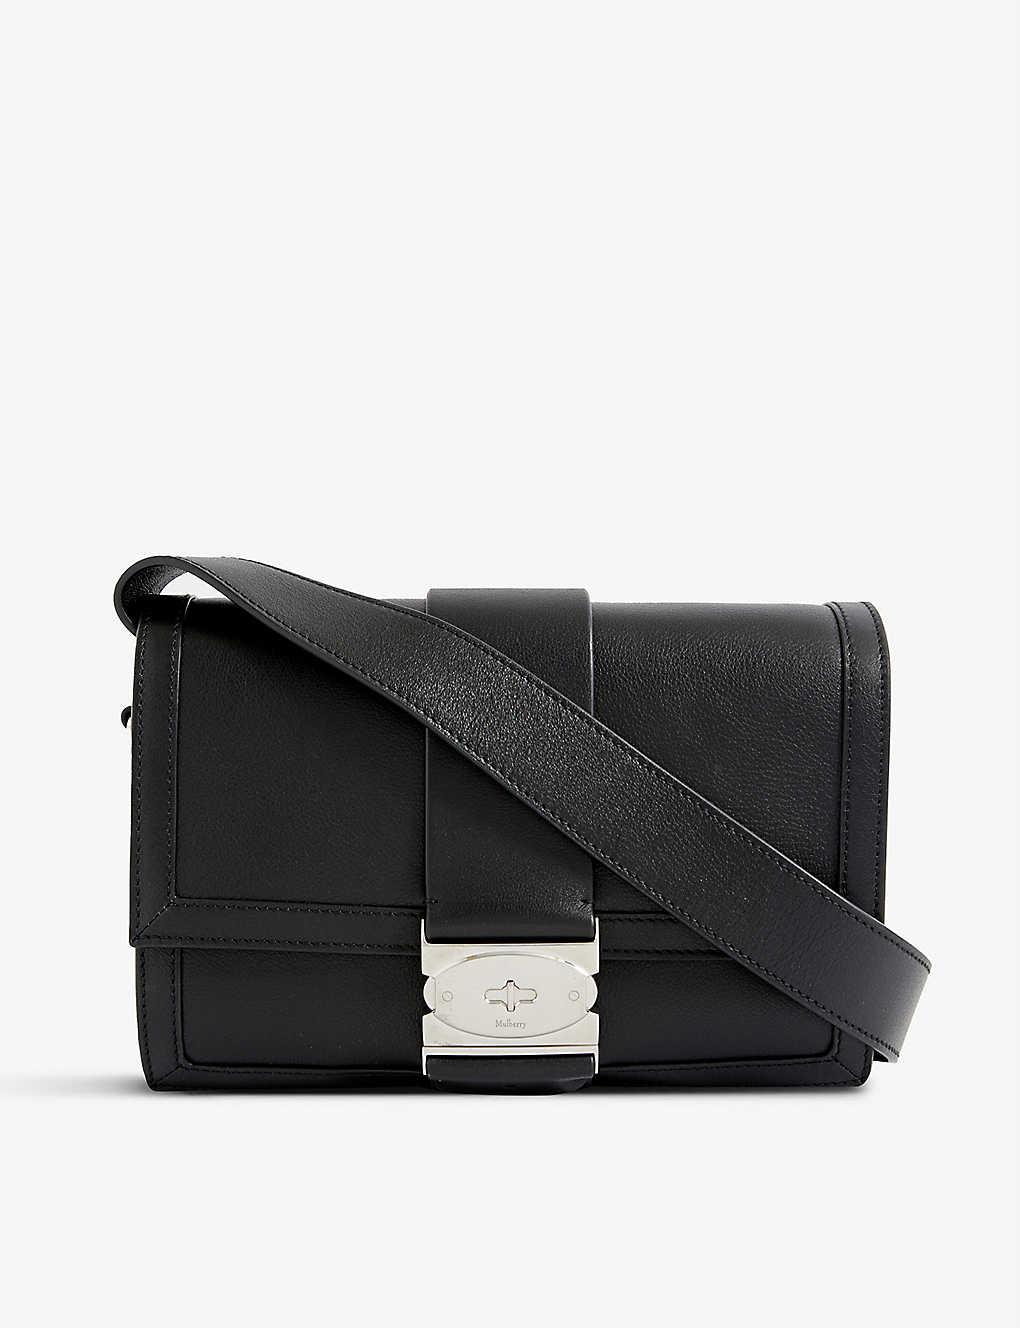 Mulberry Utility Postman's Leather Cross-body Bag in Black | Lyst